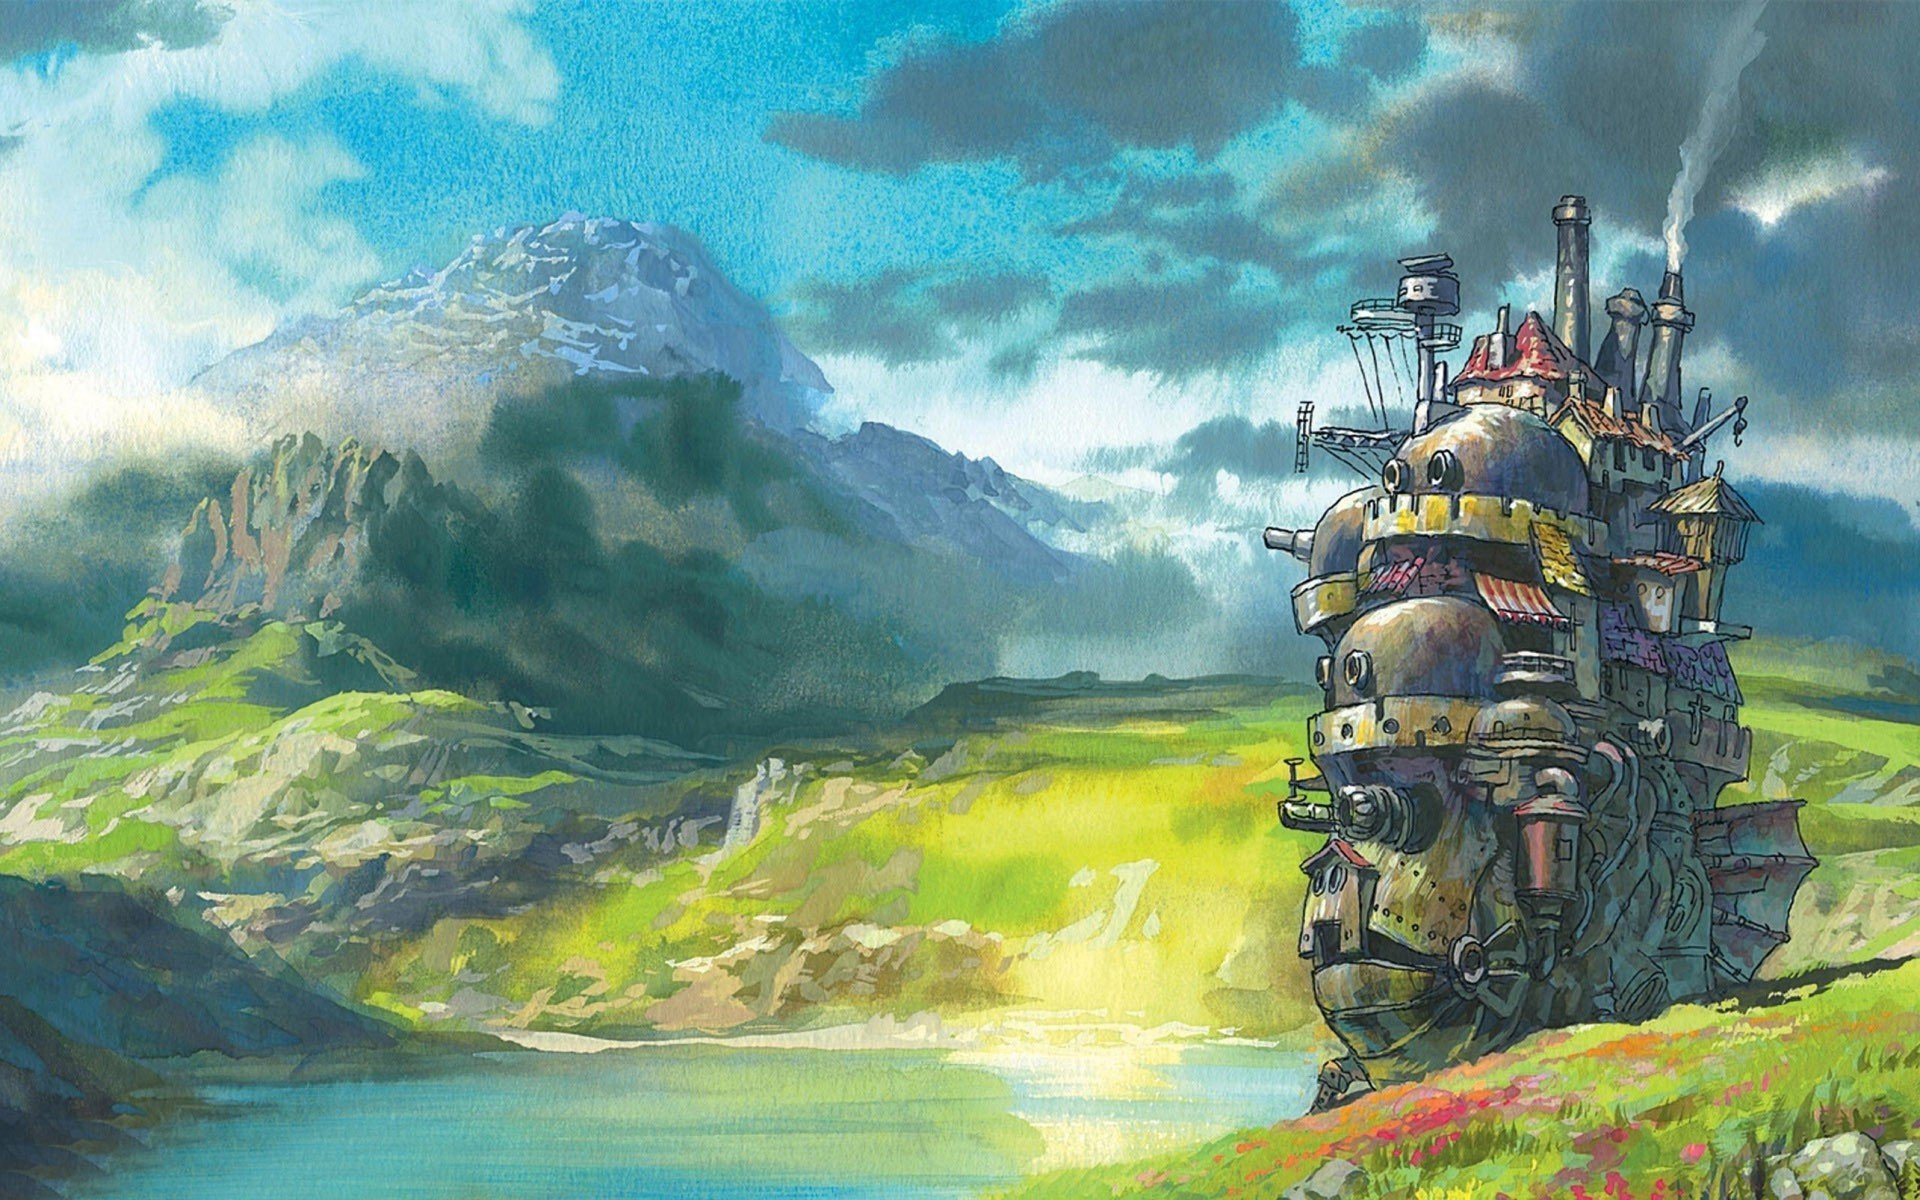 Download wallpapers howl's moving castle HD